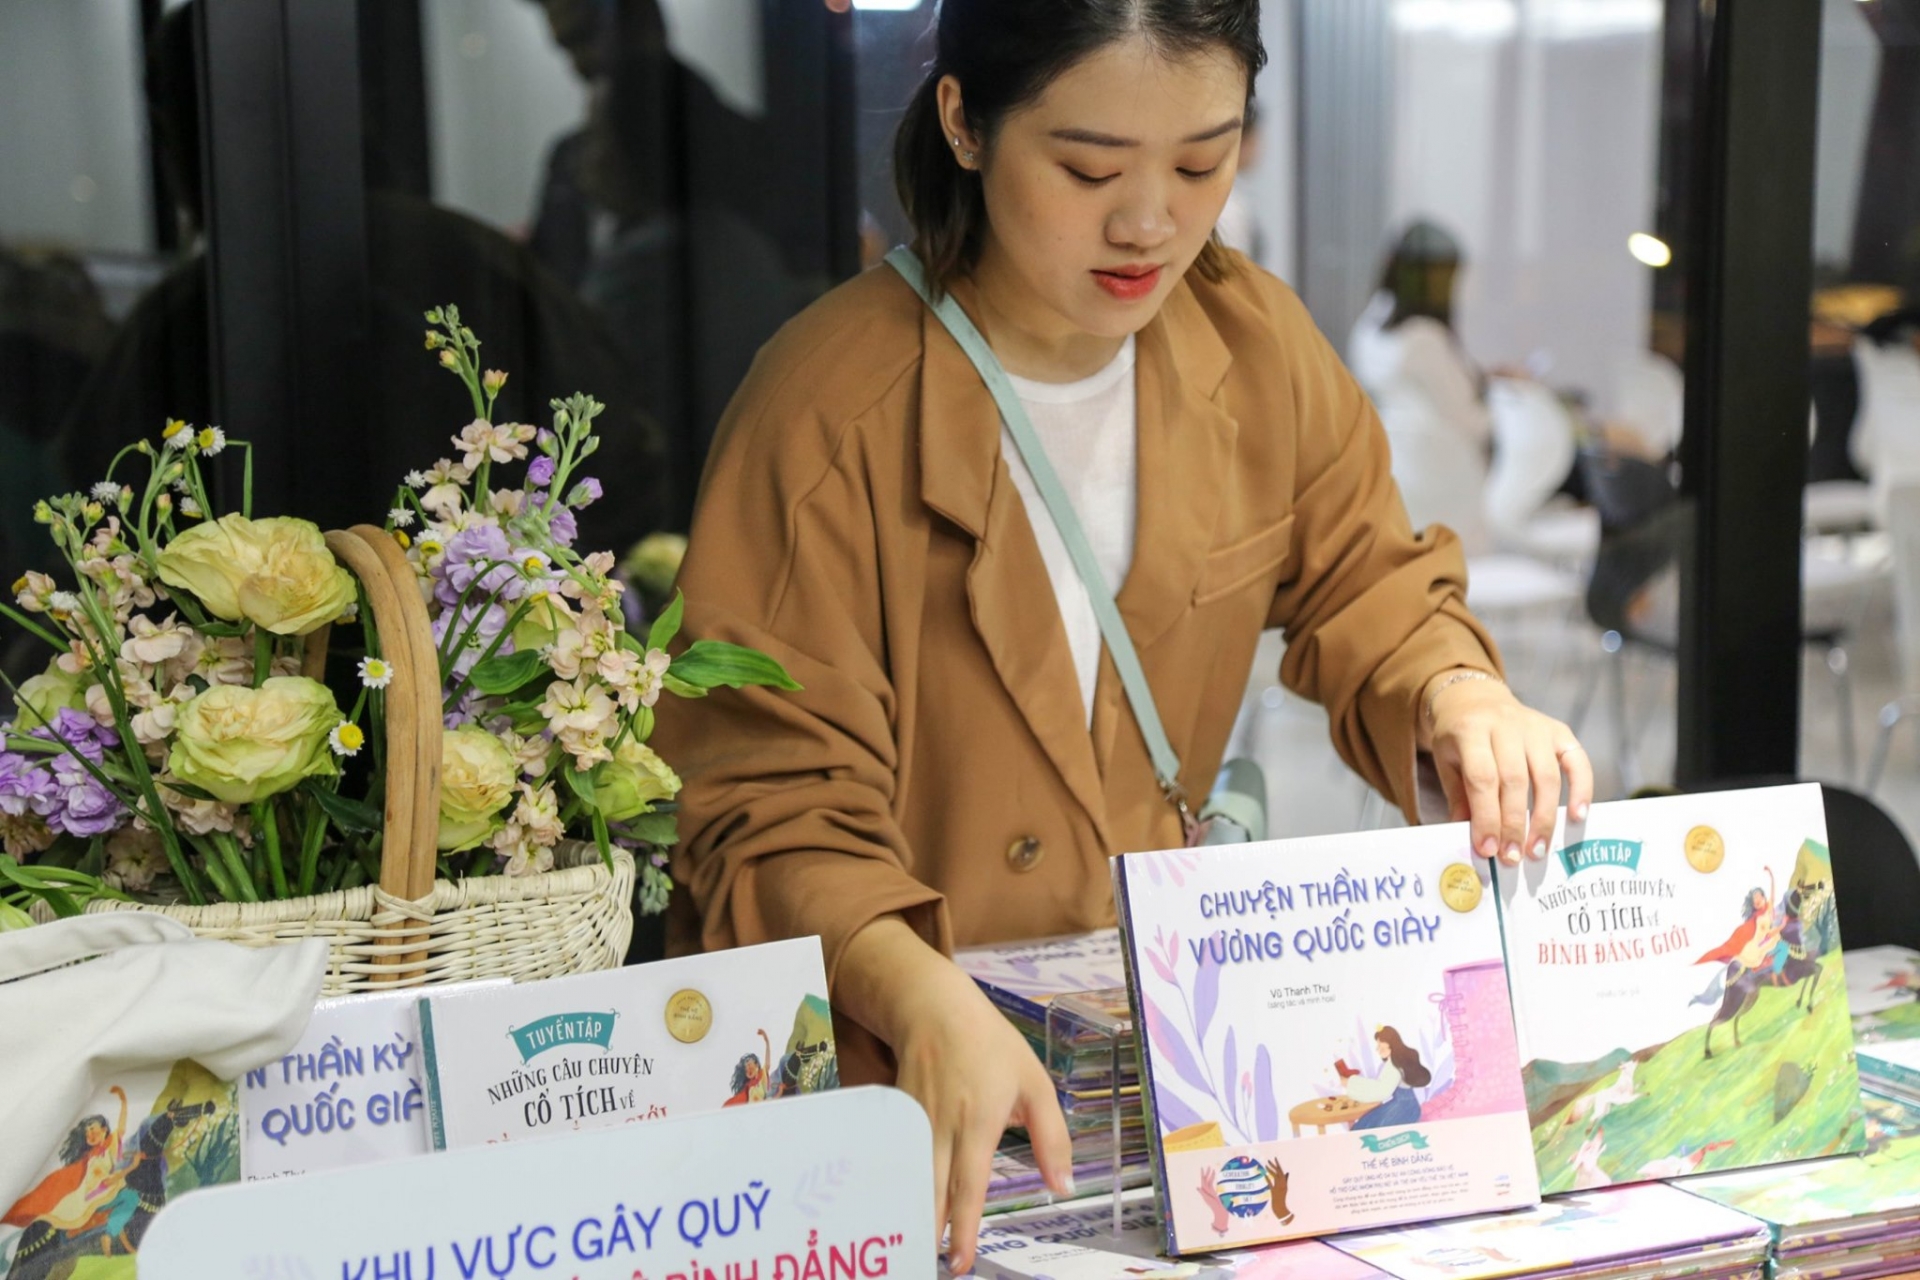 First fairy tale books on gender equality officially introduced to Vietnamese children